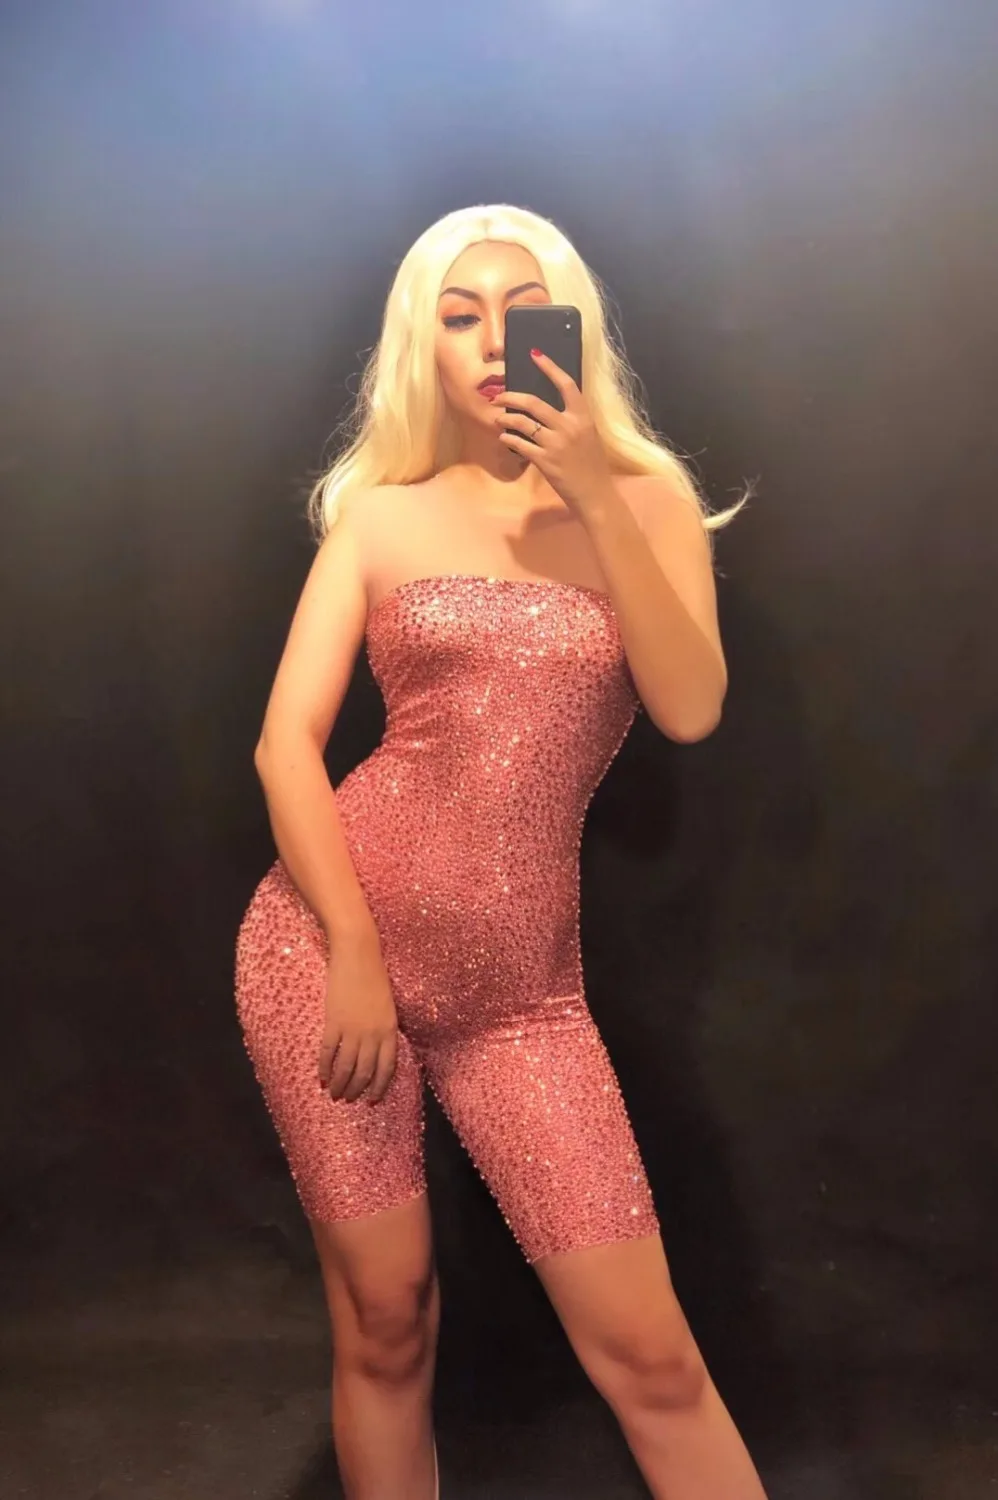 2019 Crystals Jumpsuit Birthday Banquet Stretch Bodysuit Women's Party Wear Nightclub Singer Dancer Show Outfit Sexy Leggings